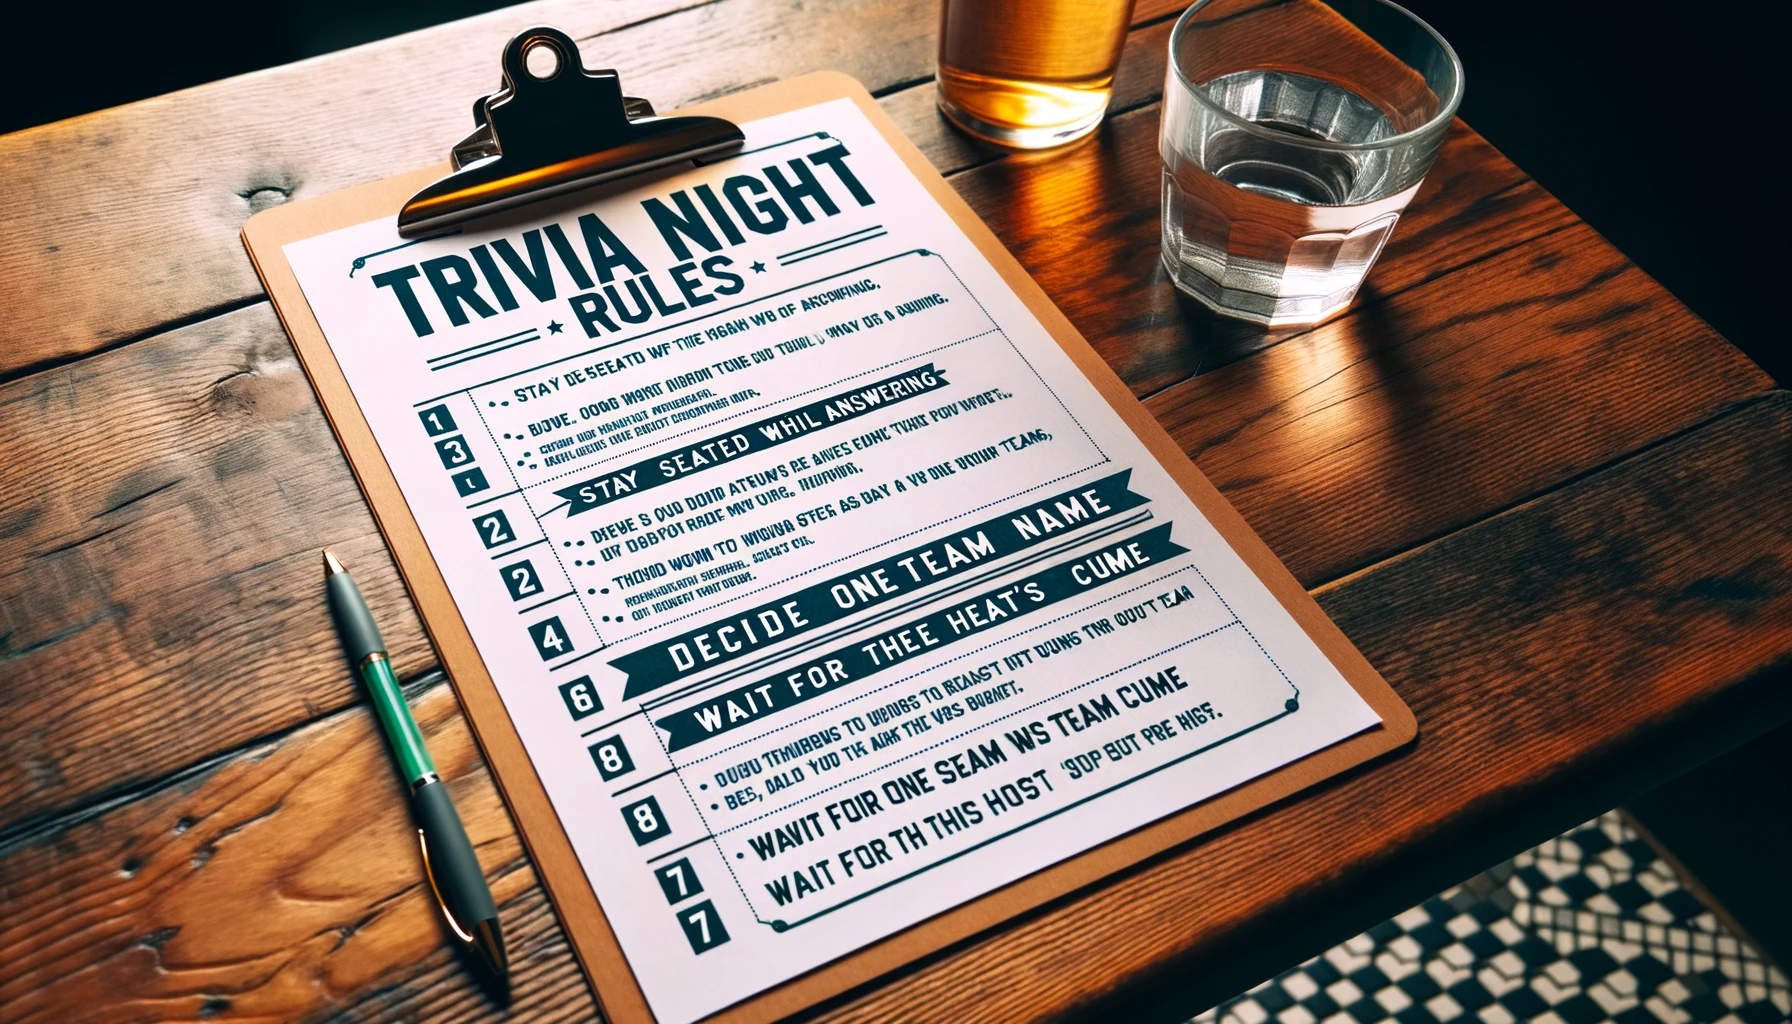 Basic Trivia Night Rules You Should Know